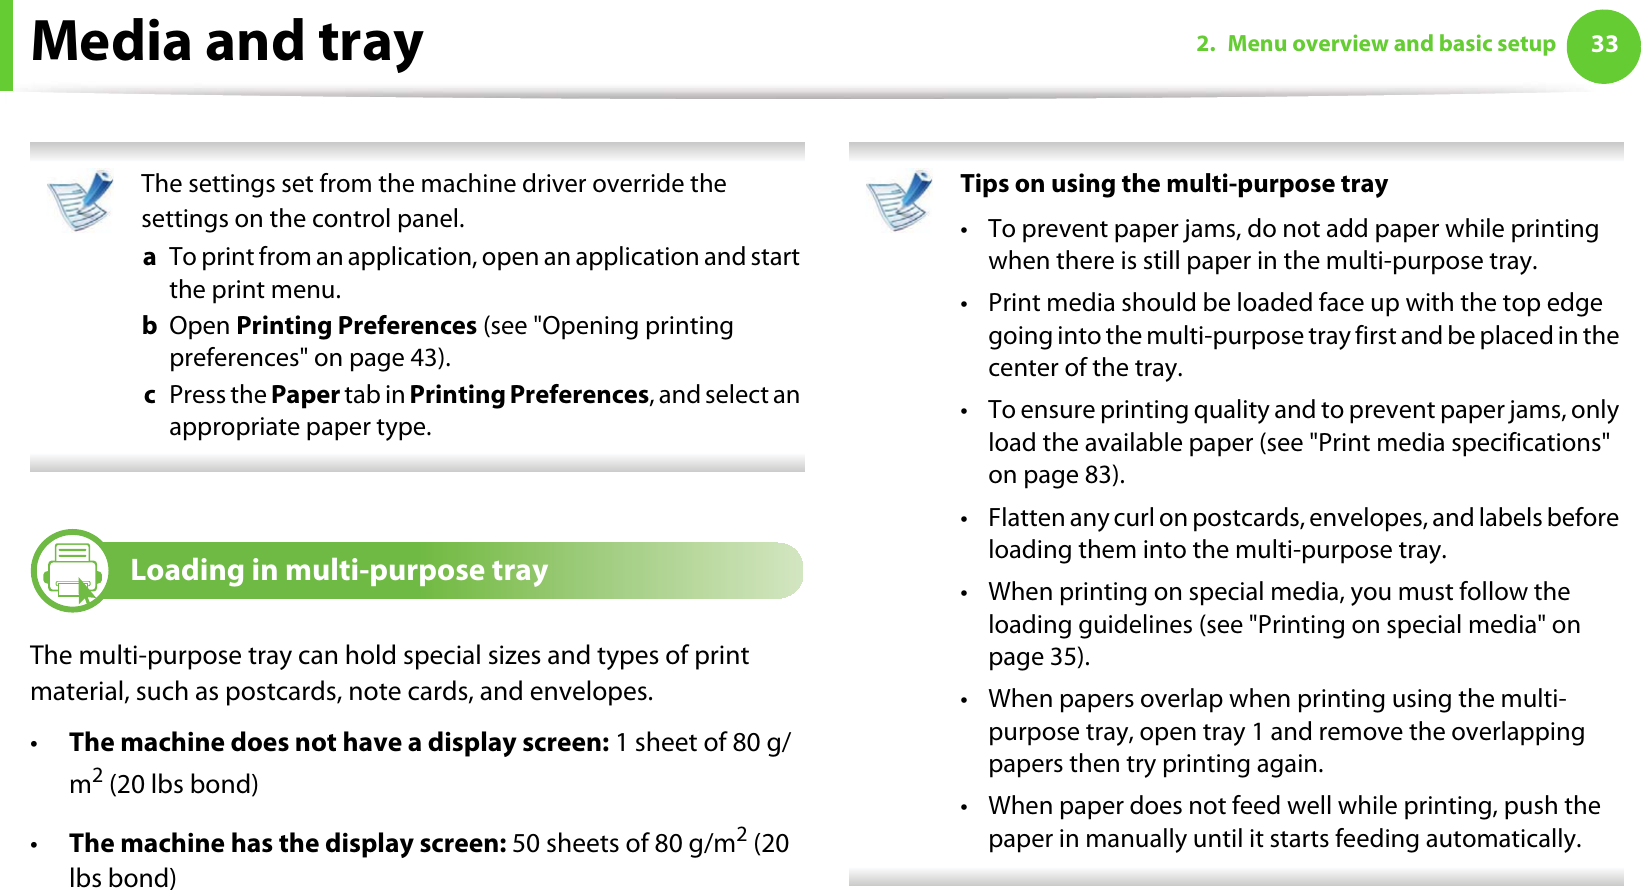 Media and tray 332. Menu overview and basic setup The settings set from the machine driver override the settings on the control panel.a  To print from an application, open an application and start the print menu.b  Open Printing Preferences (see &quot;Opening printing preferences&quot; on page 43).c  Press the Paper tab in Printing Preferences, and select an appropriate paper type.  3Loading in multi-purpose trayThe multi-purpose tray can hold special sizes and types of print material, such as postcards, note cards, and envelopes. •The machine does not have a display screen: 1 sheet of 80 g/m2 (20 lbs bond)•The machine has the display screen: 50 sheets of 80 g/m2 (20 lbs bond) Tips on using the multi-purpose tray• To prevent paper jams, do not add paper while printing when there is still paper in the multi-purpose tray.• Print media should be loaded face up with the top edge going into the multi-purpose tray first and be placed in the center of the tray.• To ensure printing quality and to prevent paper jams, only load the available paper (see &quot;Print media specifications&quot; on page 83).• Flatten any curl on postcards, envelopes, and labels before loading them into the multi-purpose tray.• When printing on special media, you must follow the loading guidelines (see &quot;Printing on special media&quot; on page 35).• When papers overlap when printing using the multi-purpose tray, open tray 1 and remove the overlapping papers then try printing again. • When paper does not feed well while printing, push the paper in manually until it starts feeding automatically.  